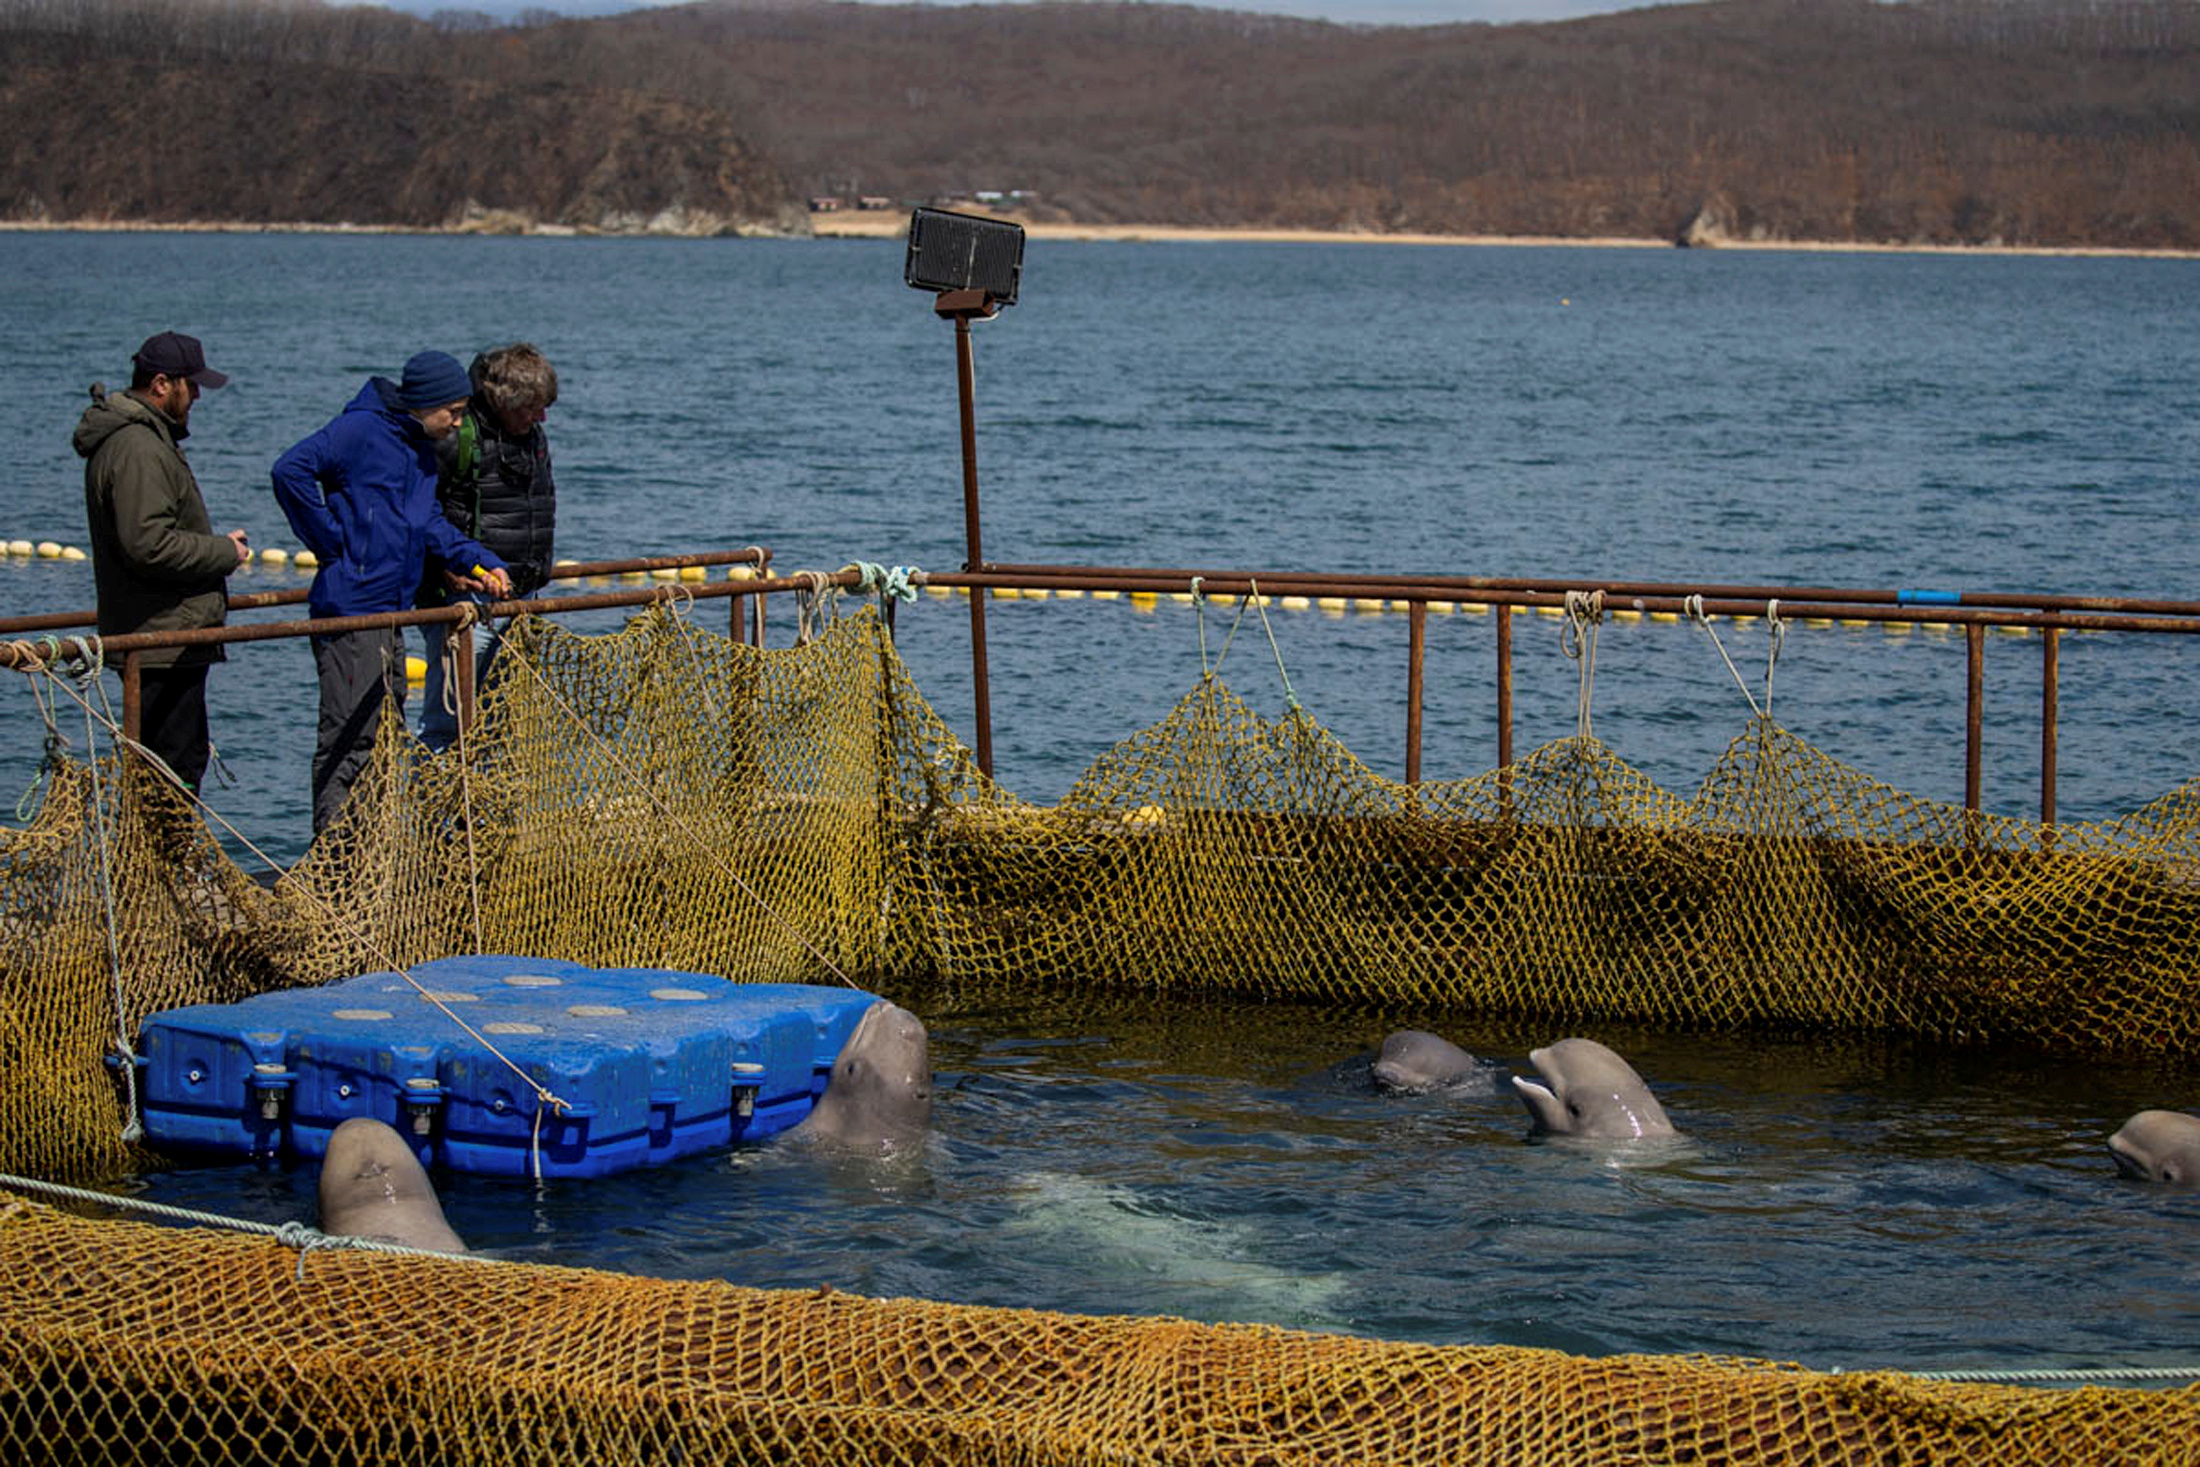 A view shows a facility, where nearly 100 whales including orcas and beluga whales are held in cages, during a visit of scientists representing explorer and founder of the Ocean Futures Society Jean-Michel Cousteau in a bay near the Sea of Japan port of Nakhodka in Primorsky Region, Russia April 7, 2019. Picture taken April 7, 2019. Press Service of Administration of Primorsky Krai/Alexander Safronov/Handout via REUTERS ATTENTION EDITORS - THIS IMAGE WAS PROVIDED BY A THIRD PARTY. NO RESALES. NO ARCHIVES. TPX IMAGES OF THE DAY